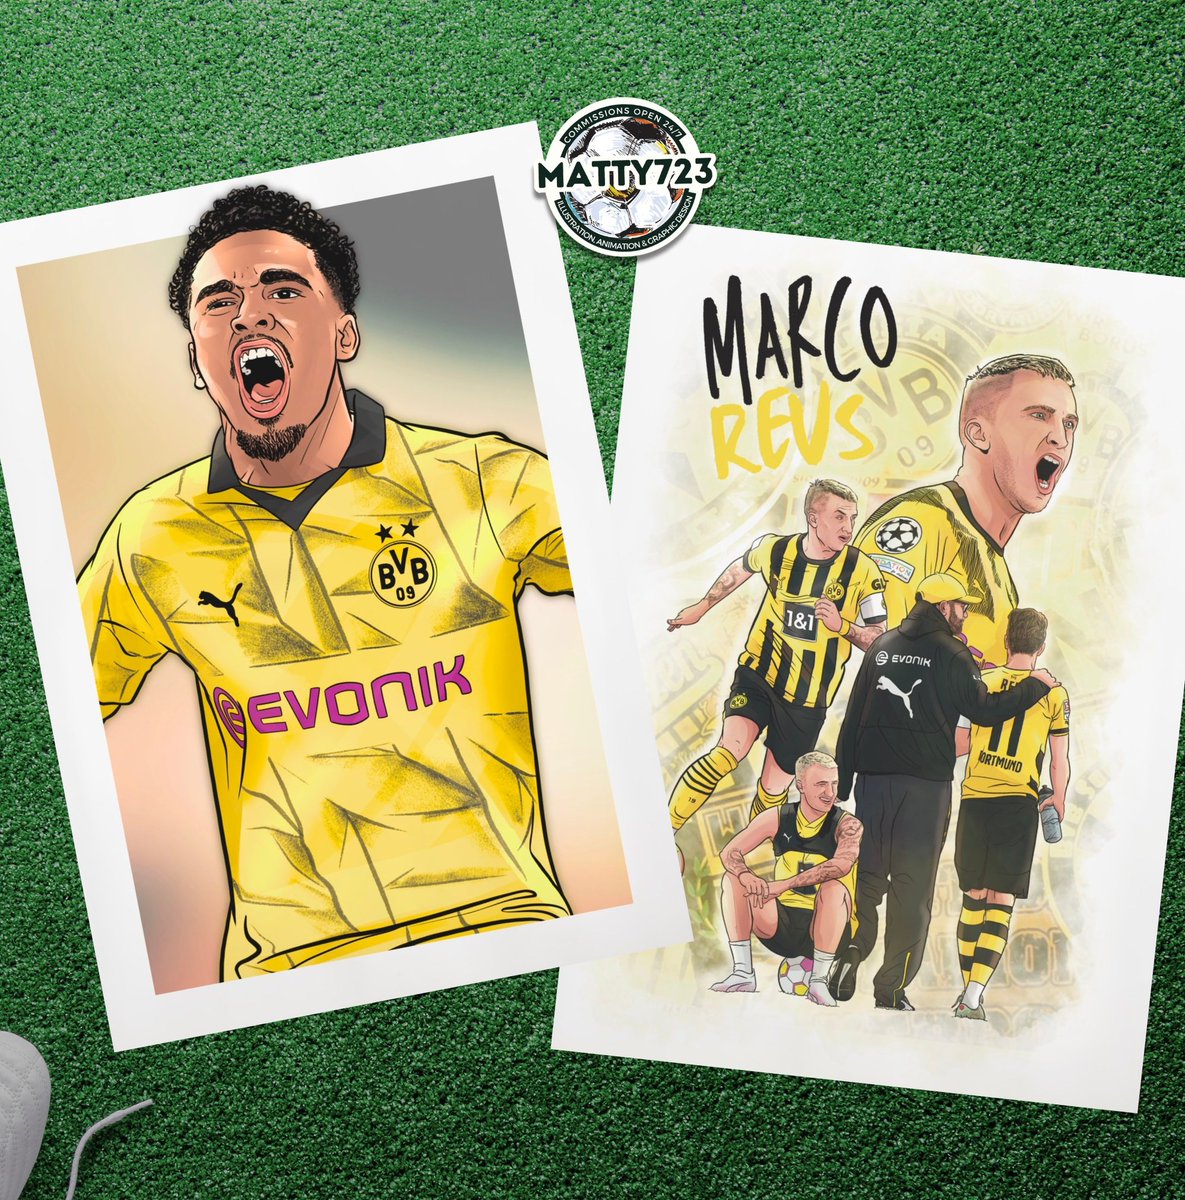 For those who might have missed it - Marcel Sabitzer - Nico Schlotterbeck & Ian Maatsen all added to the #BVB shop this week along with a Limited Edition Marco Reus Print Dortmund Fans, help me out, there's 20% off EVERYTHING with code MAY so please hit repost 🙏🏻 #Matty723